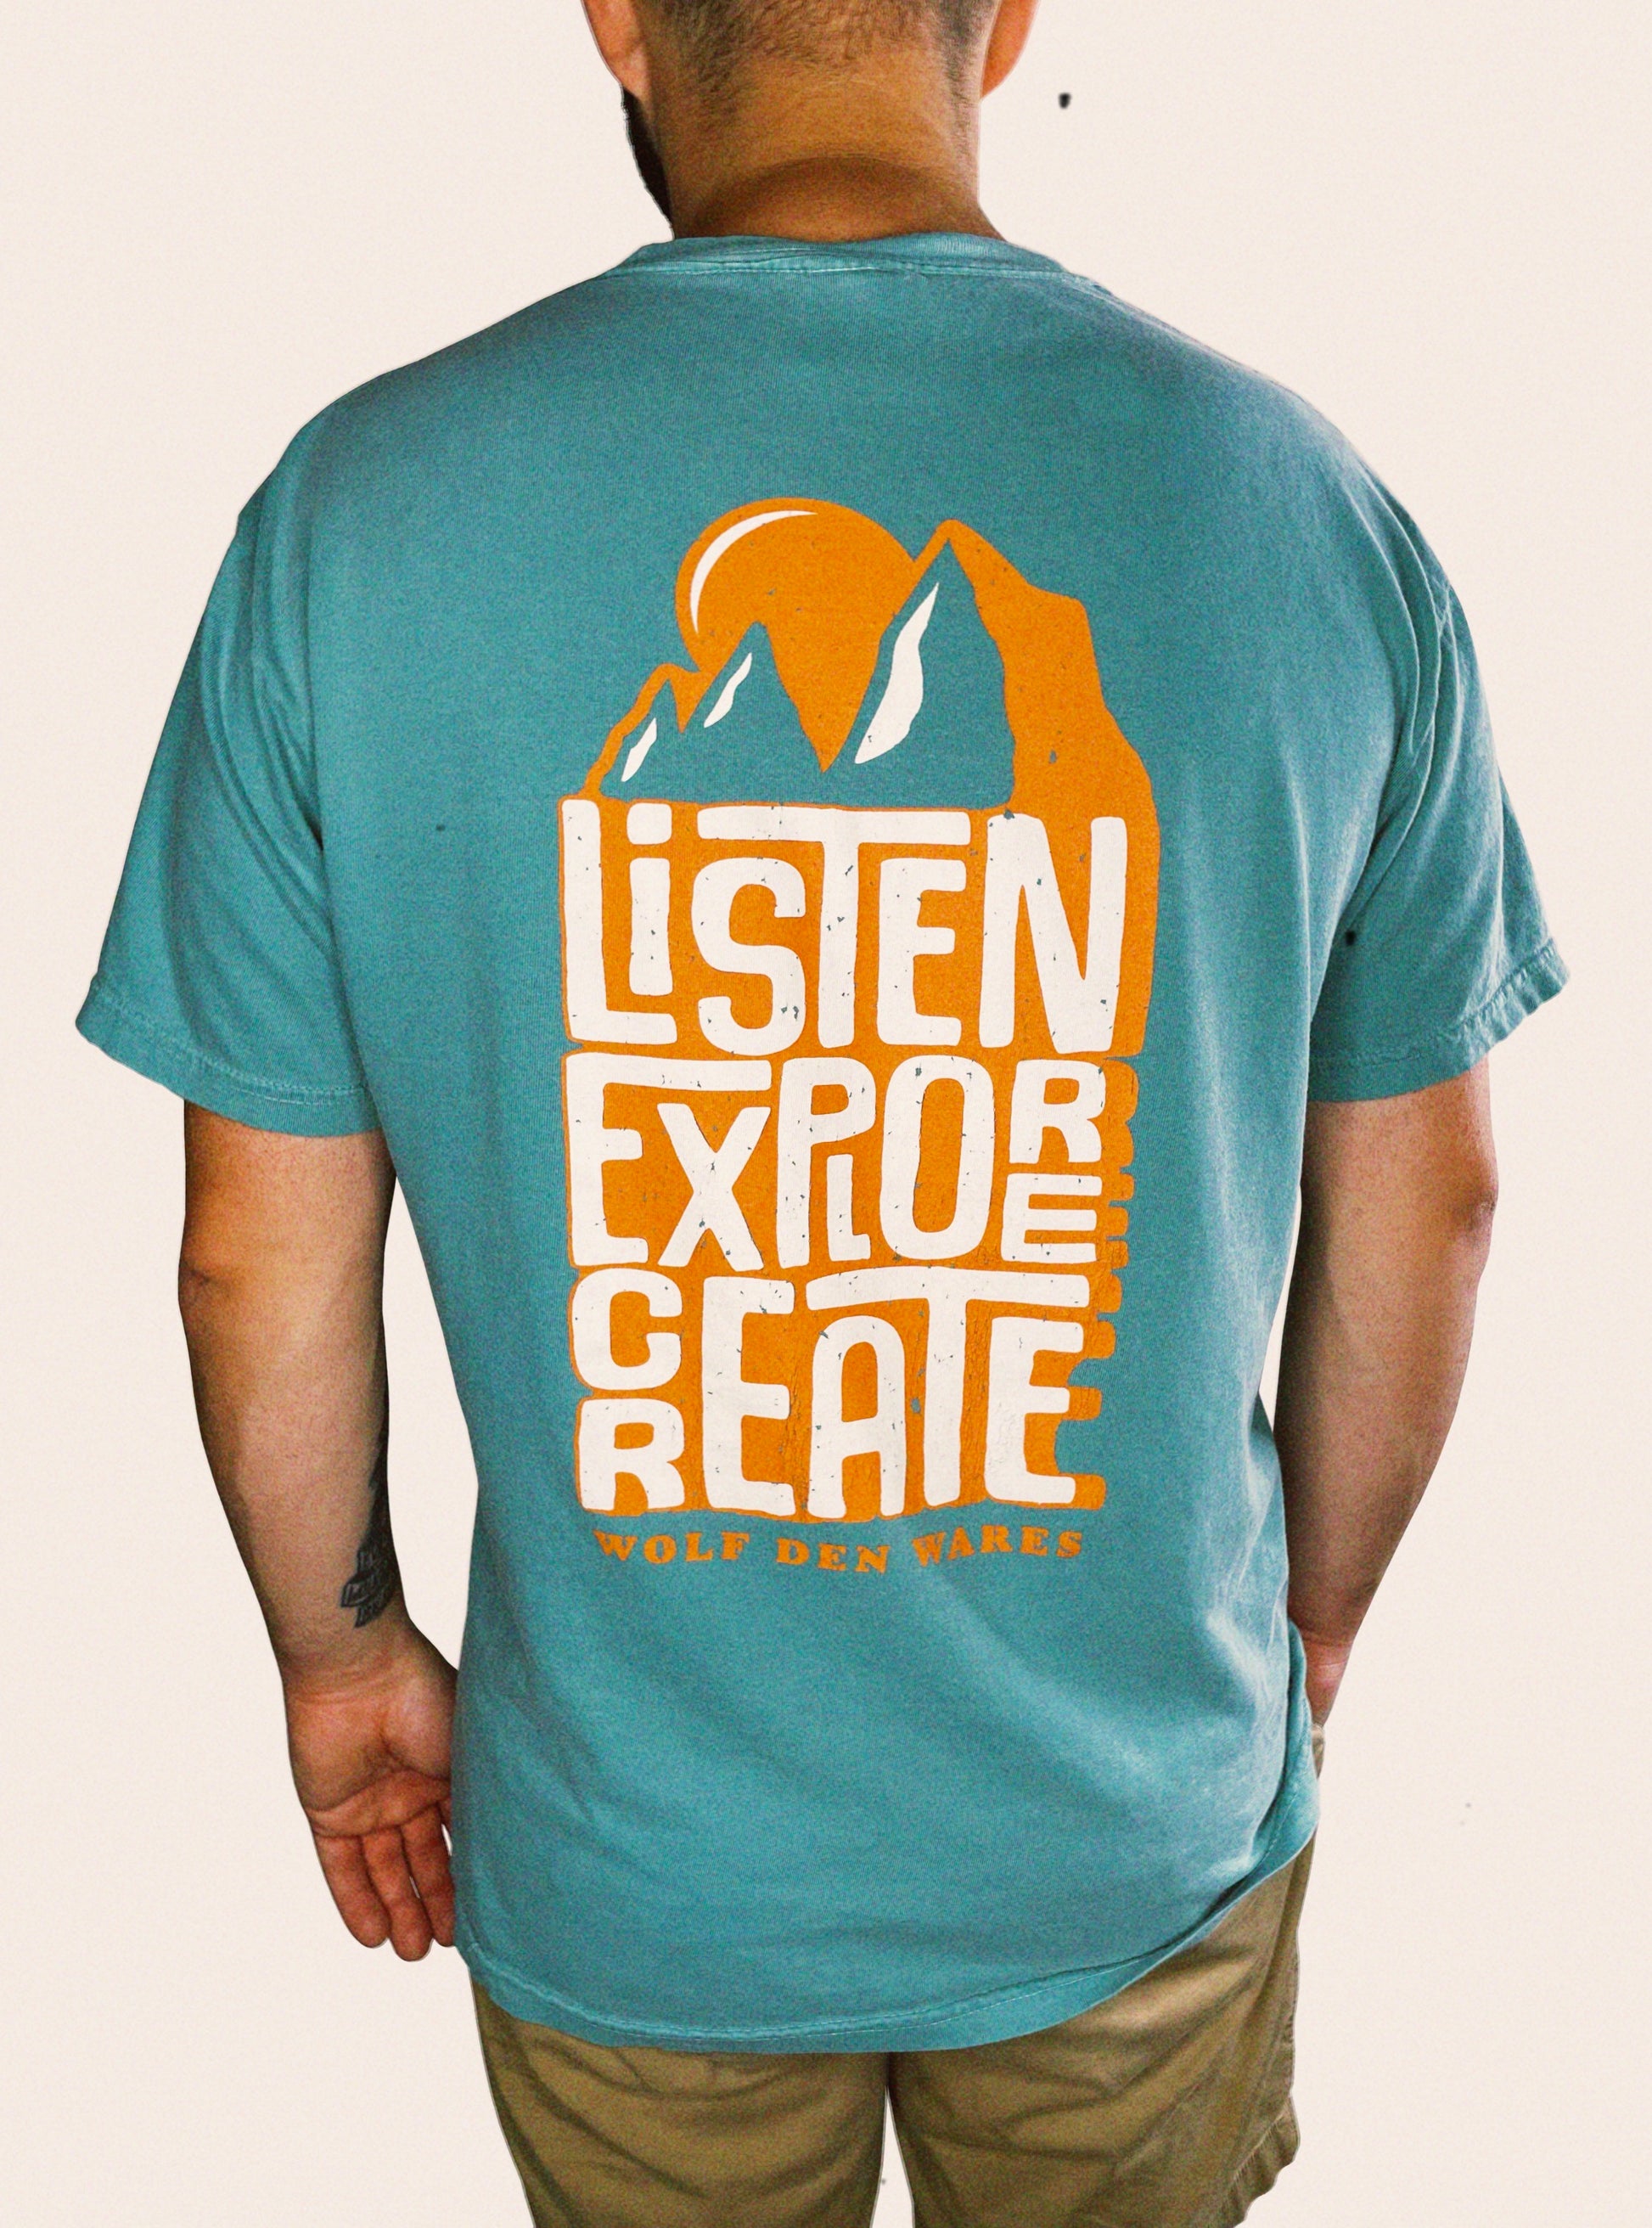 Seafoam Comfort Colors tee embellished with LiSTEN EXPLORE CREATE and WOLF DEN WARES